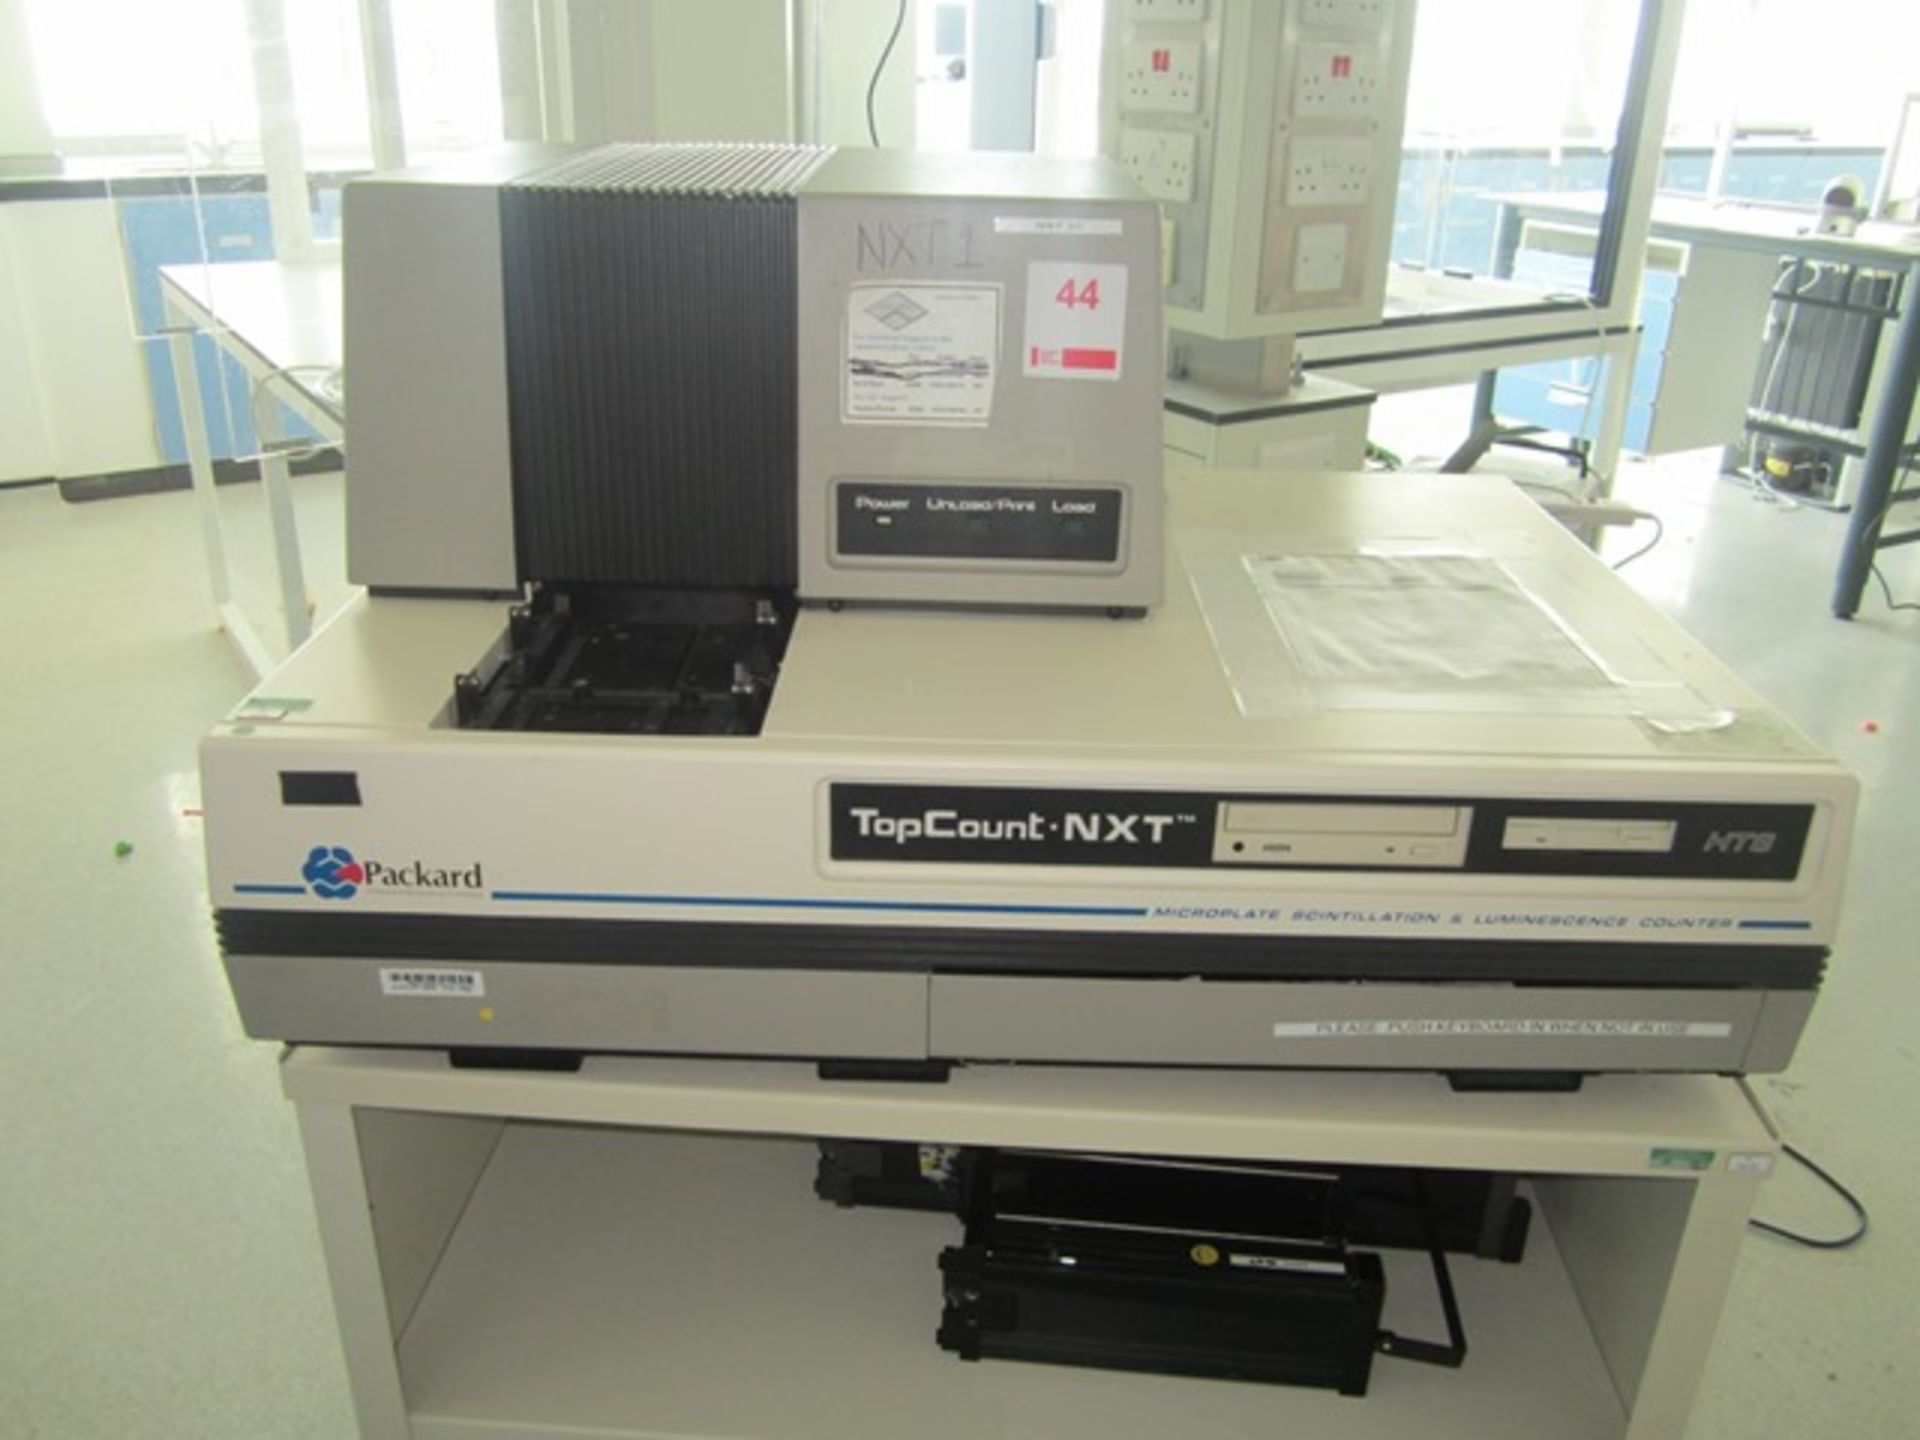 Packard TopCount NXT bench top microplate Scintillation counter and Luminescence detector, serial